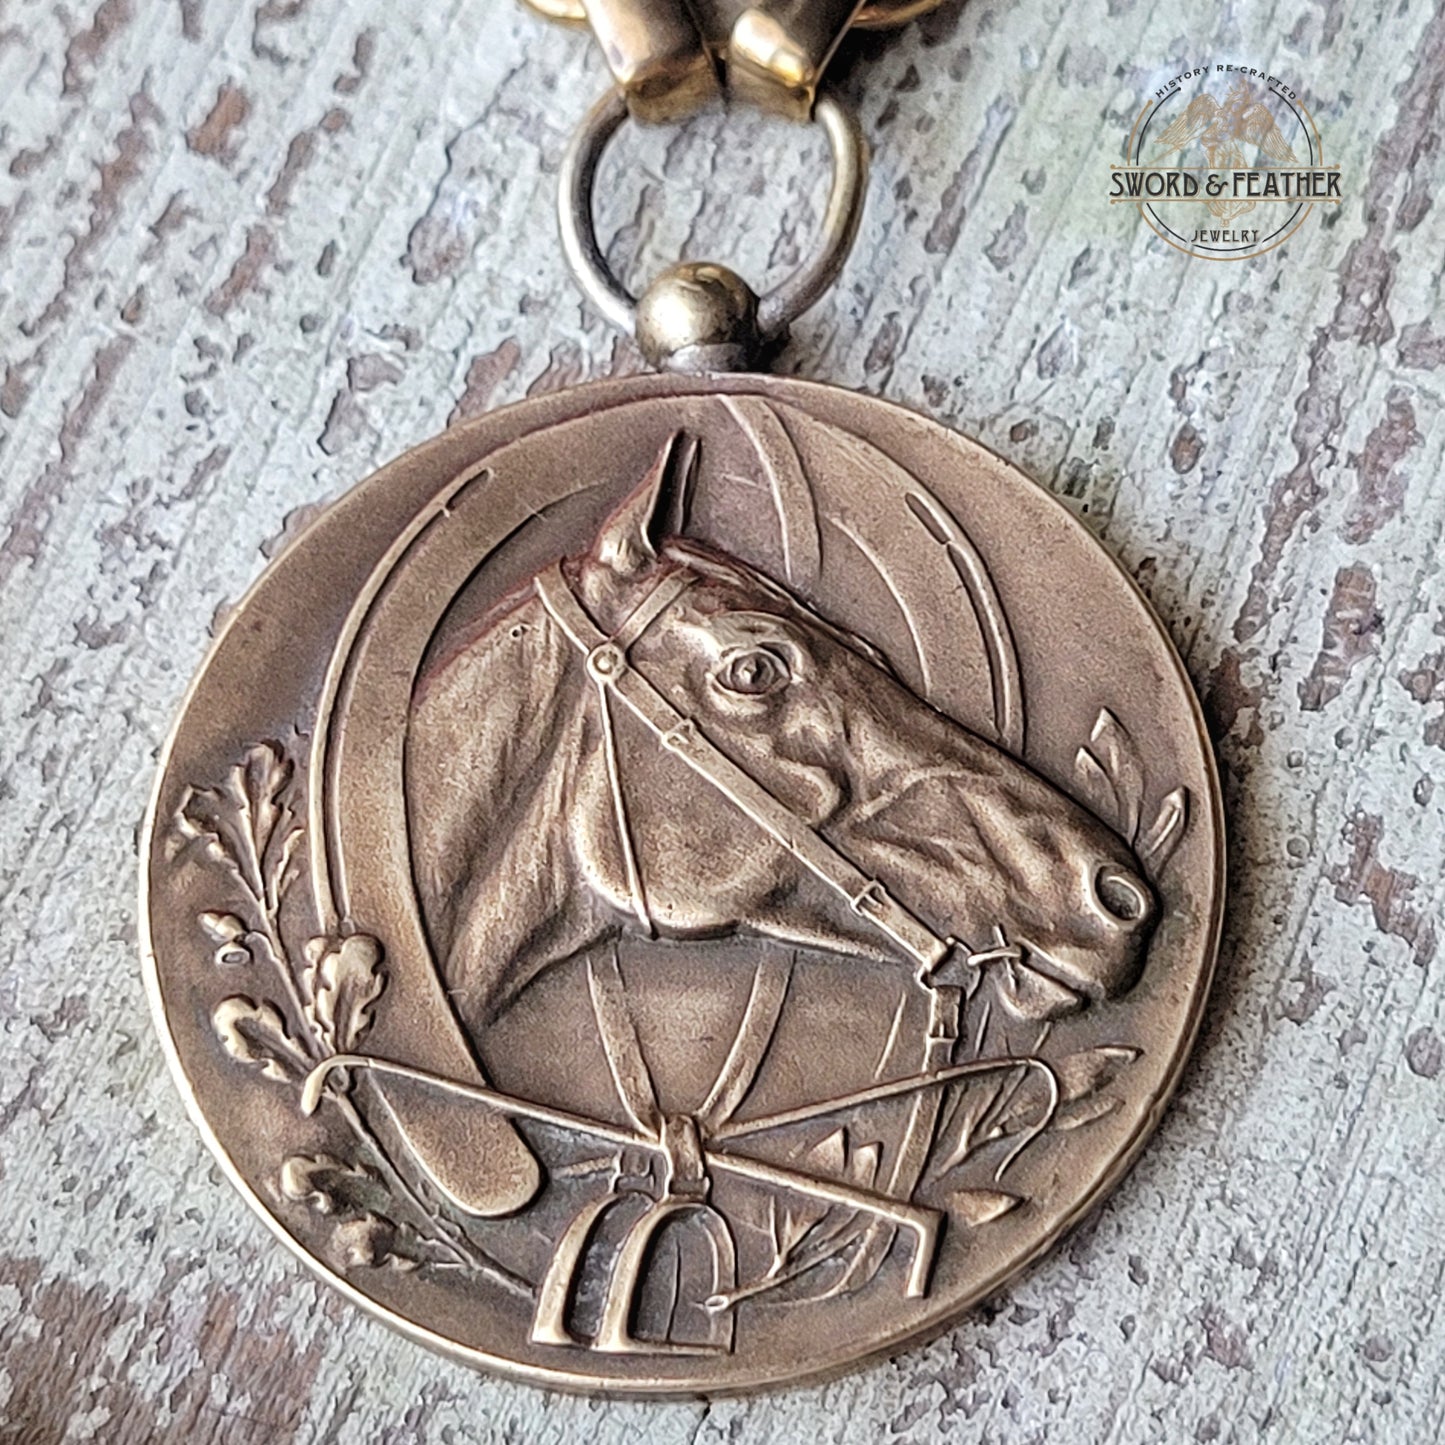 Vintage Equestrian Medallion Necklace, antique Dutch Equestrian medal, solid brass elongated station chain, fancy swivel lobster clasp, bohemian chic necklace